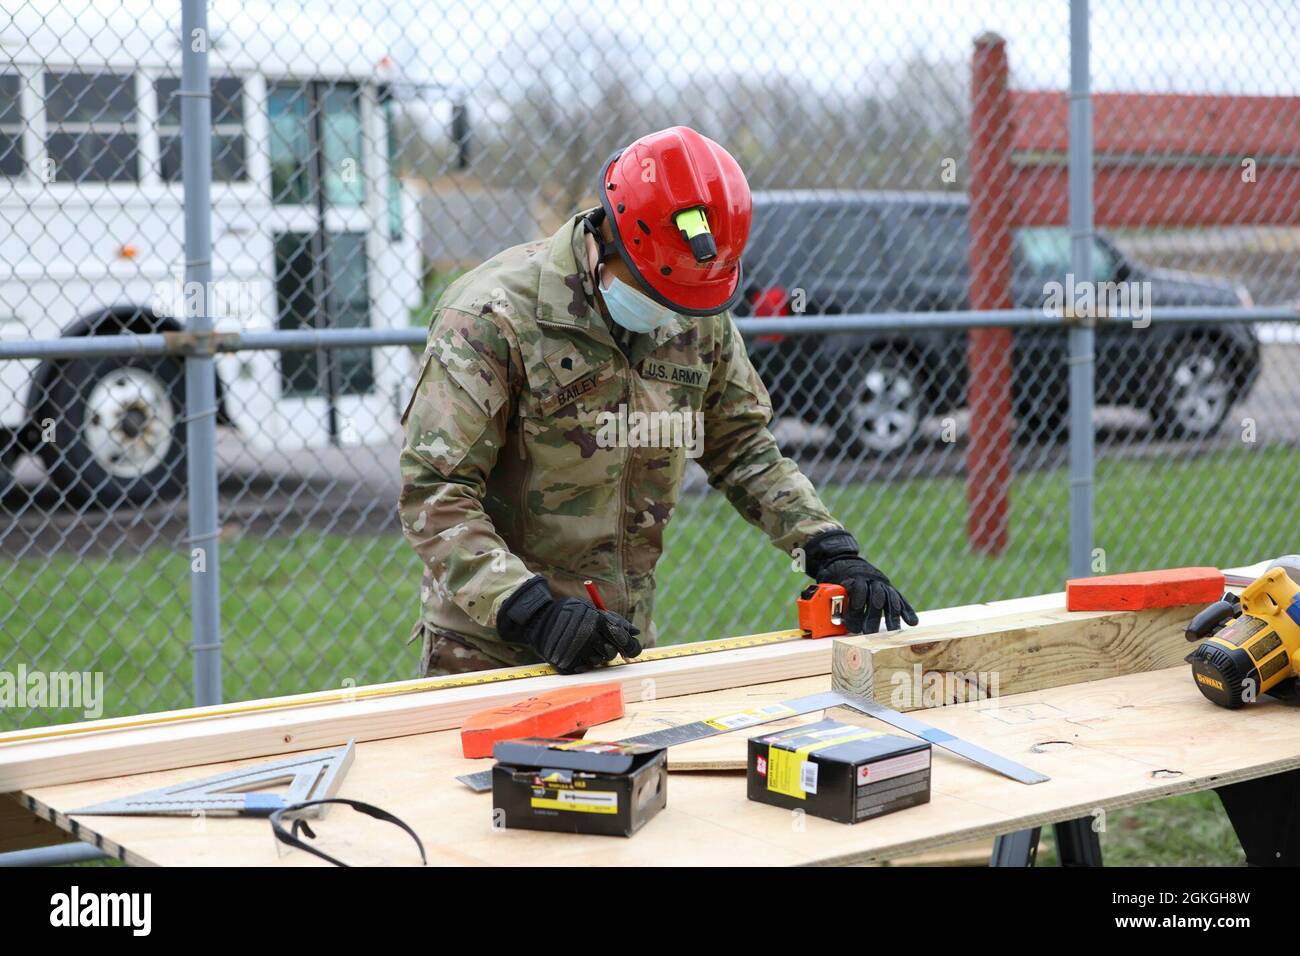 Spc. Jacob Bailey, a combat engineer assigned to Bravo Company, 152nd Brigade Engineer Battalion of the New York Army National Guard, measures materials for shoring exercises during a Homeland Response Force collective training event in East Amherst, New York on April 16. Jacob's unit is assigned as the search and extraction element of the FEMA Region II HRF's CBRN Task Force. Stock Photo